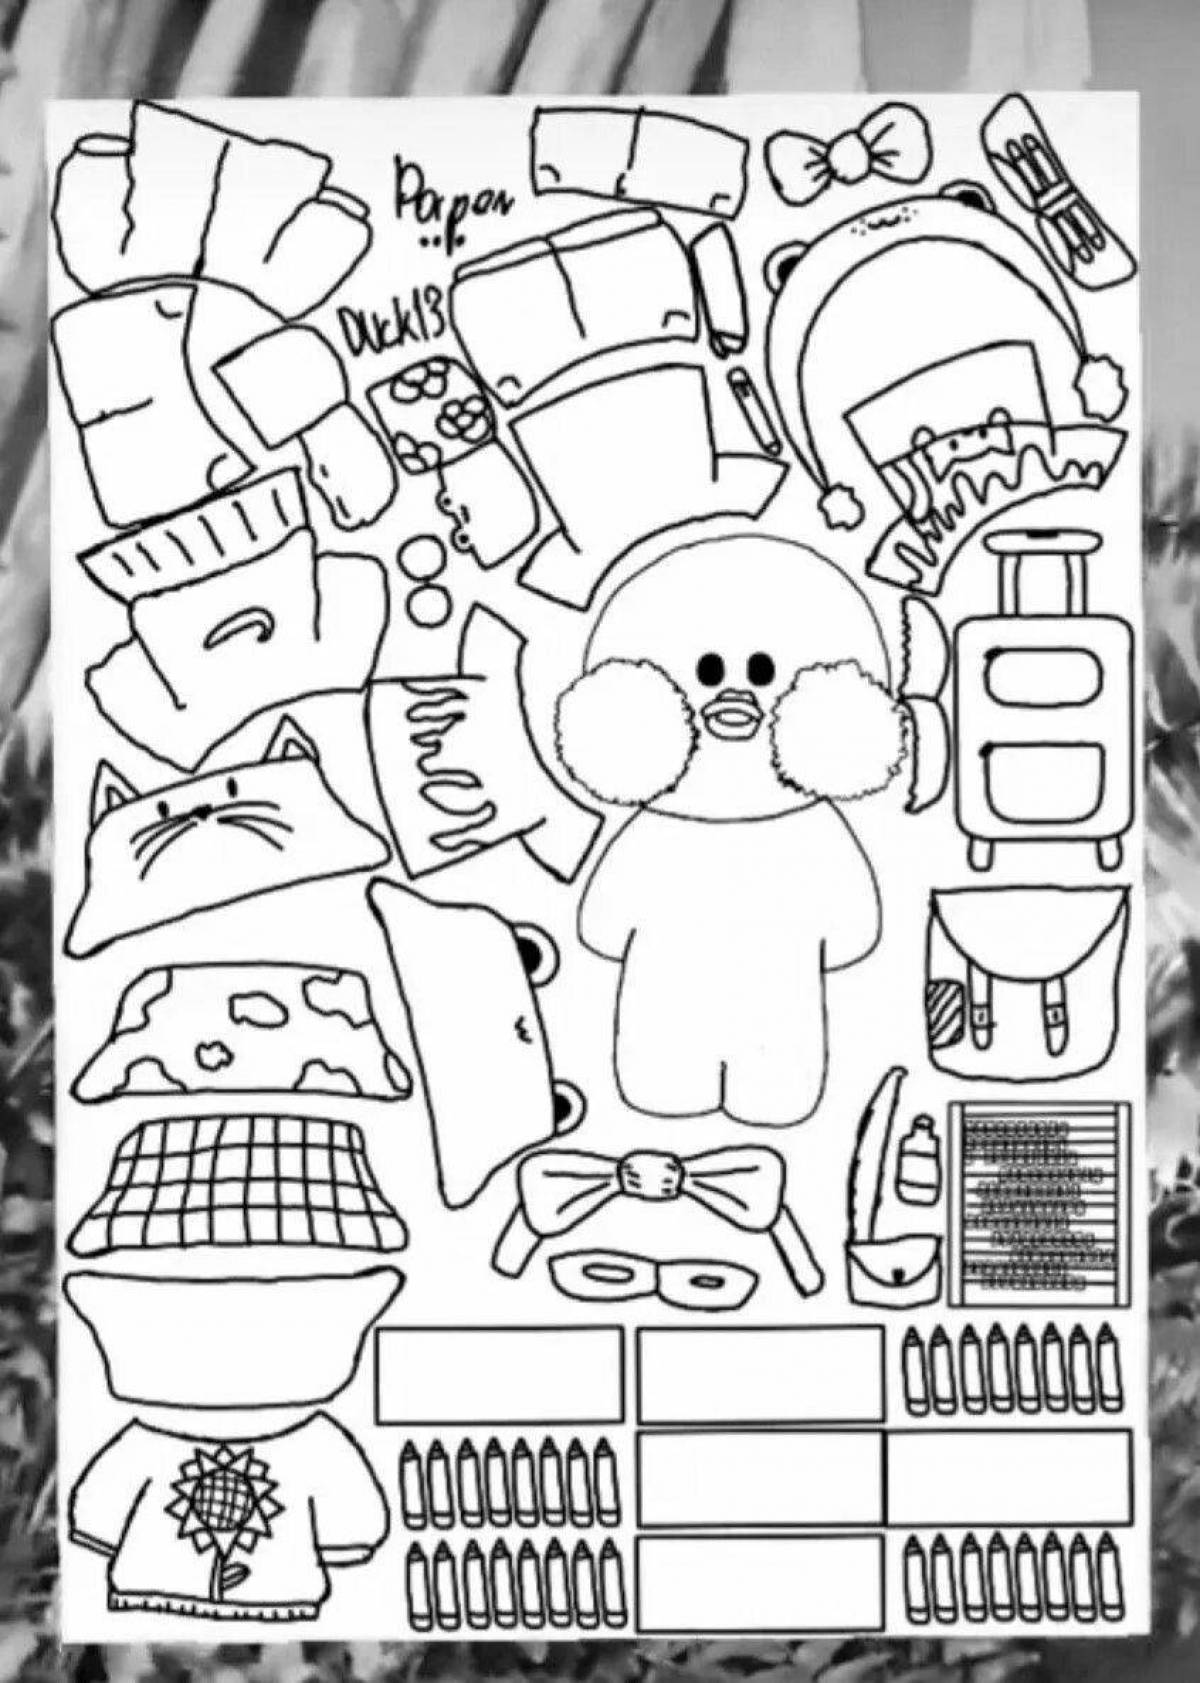 Lalafanfan duck magic coloring page